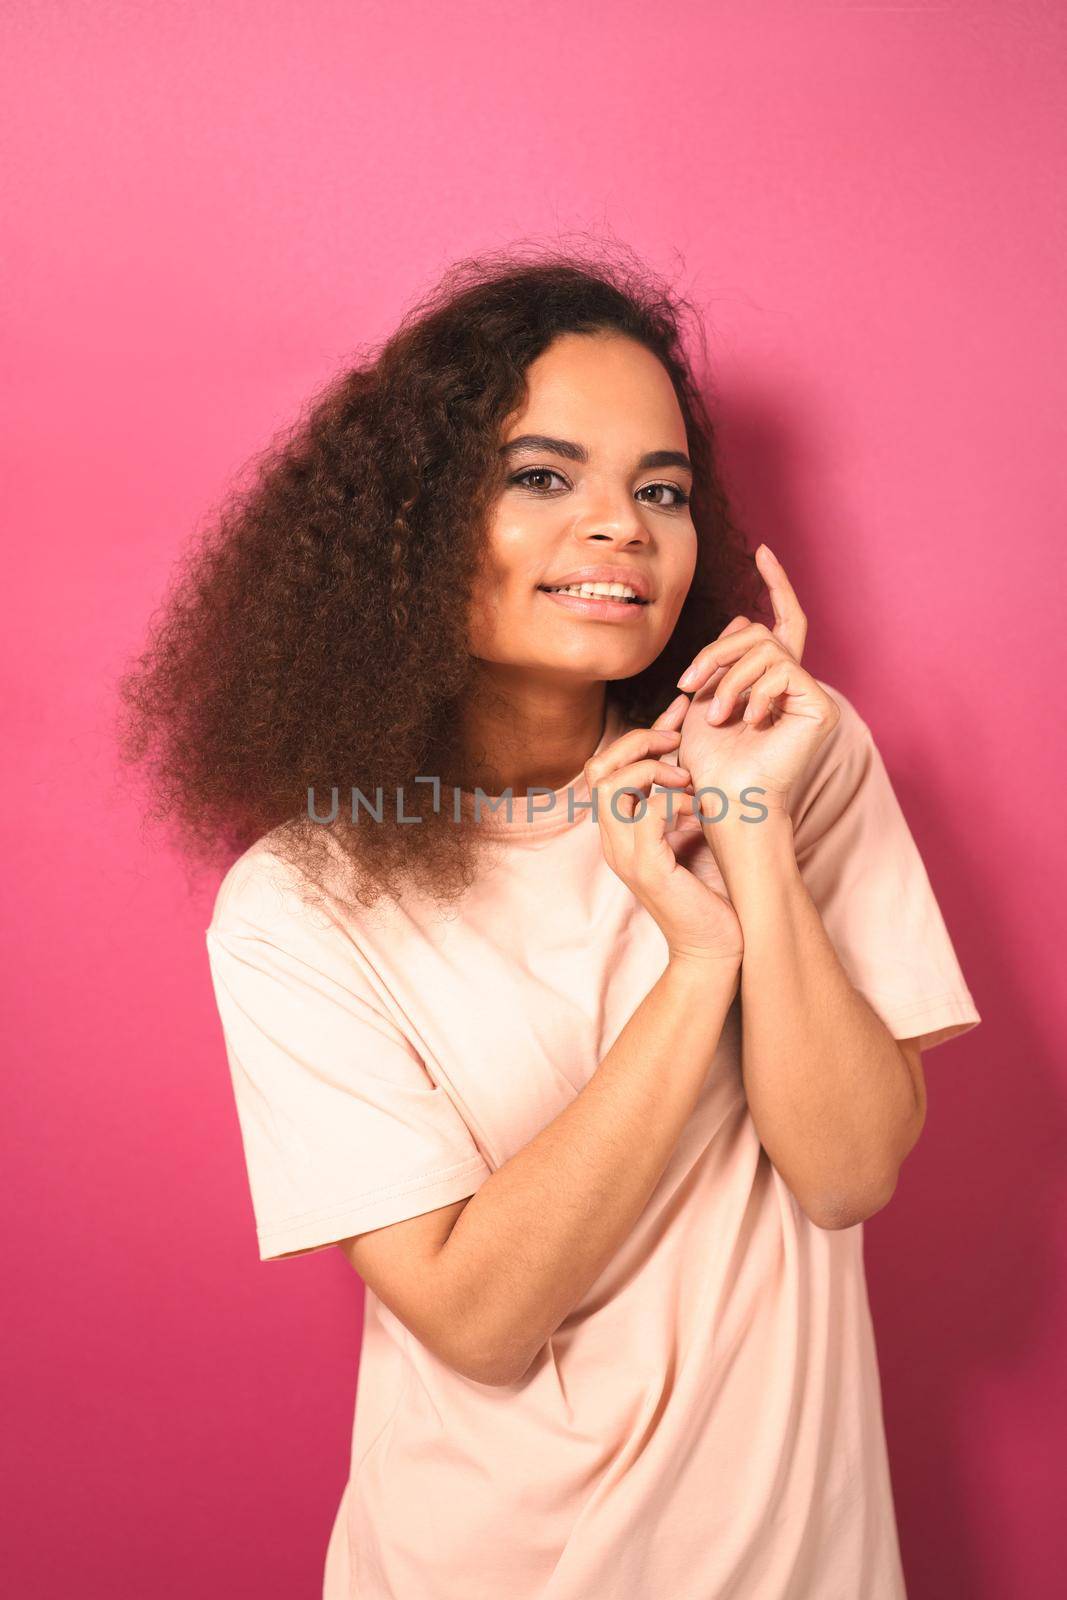 Beautiful dark skinned African American young girl looking gently at camera wearing peachy t-shirt isolated on pink background. Beauty concept. Facial expressions, emotions, feelings.